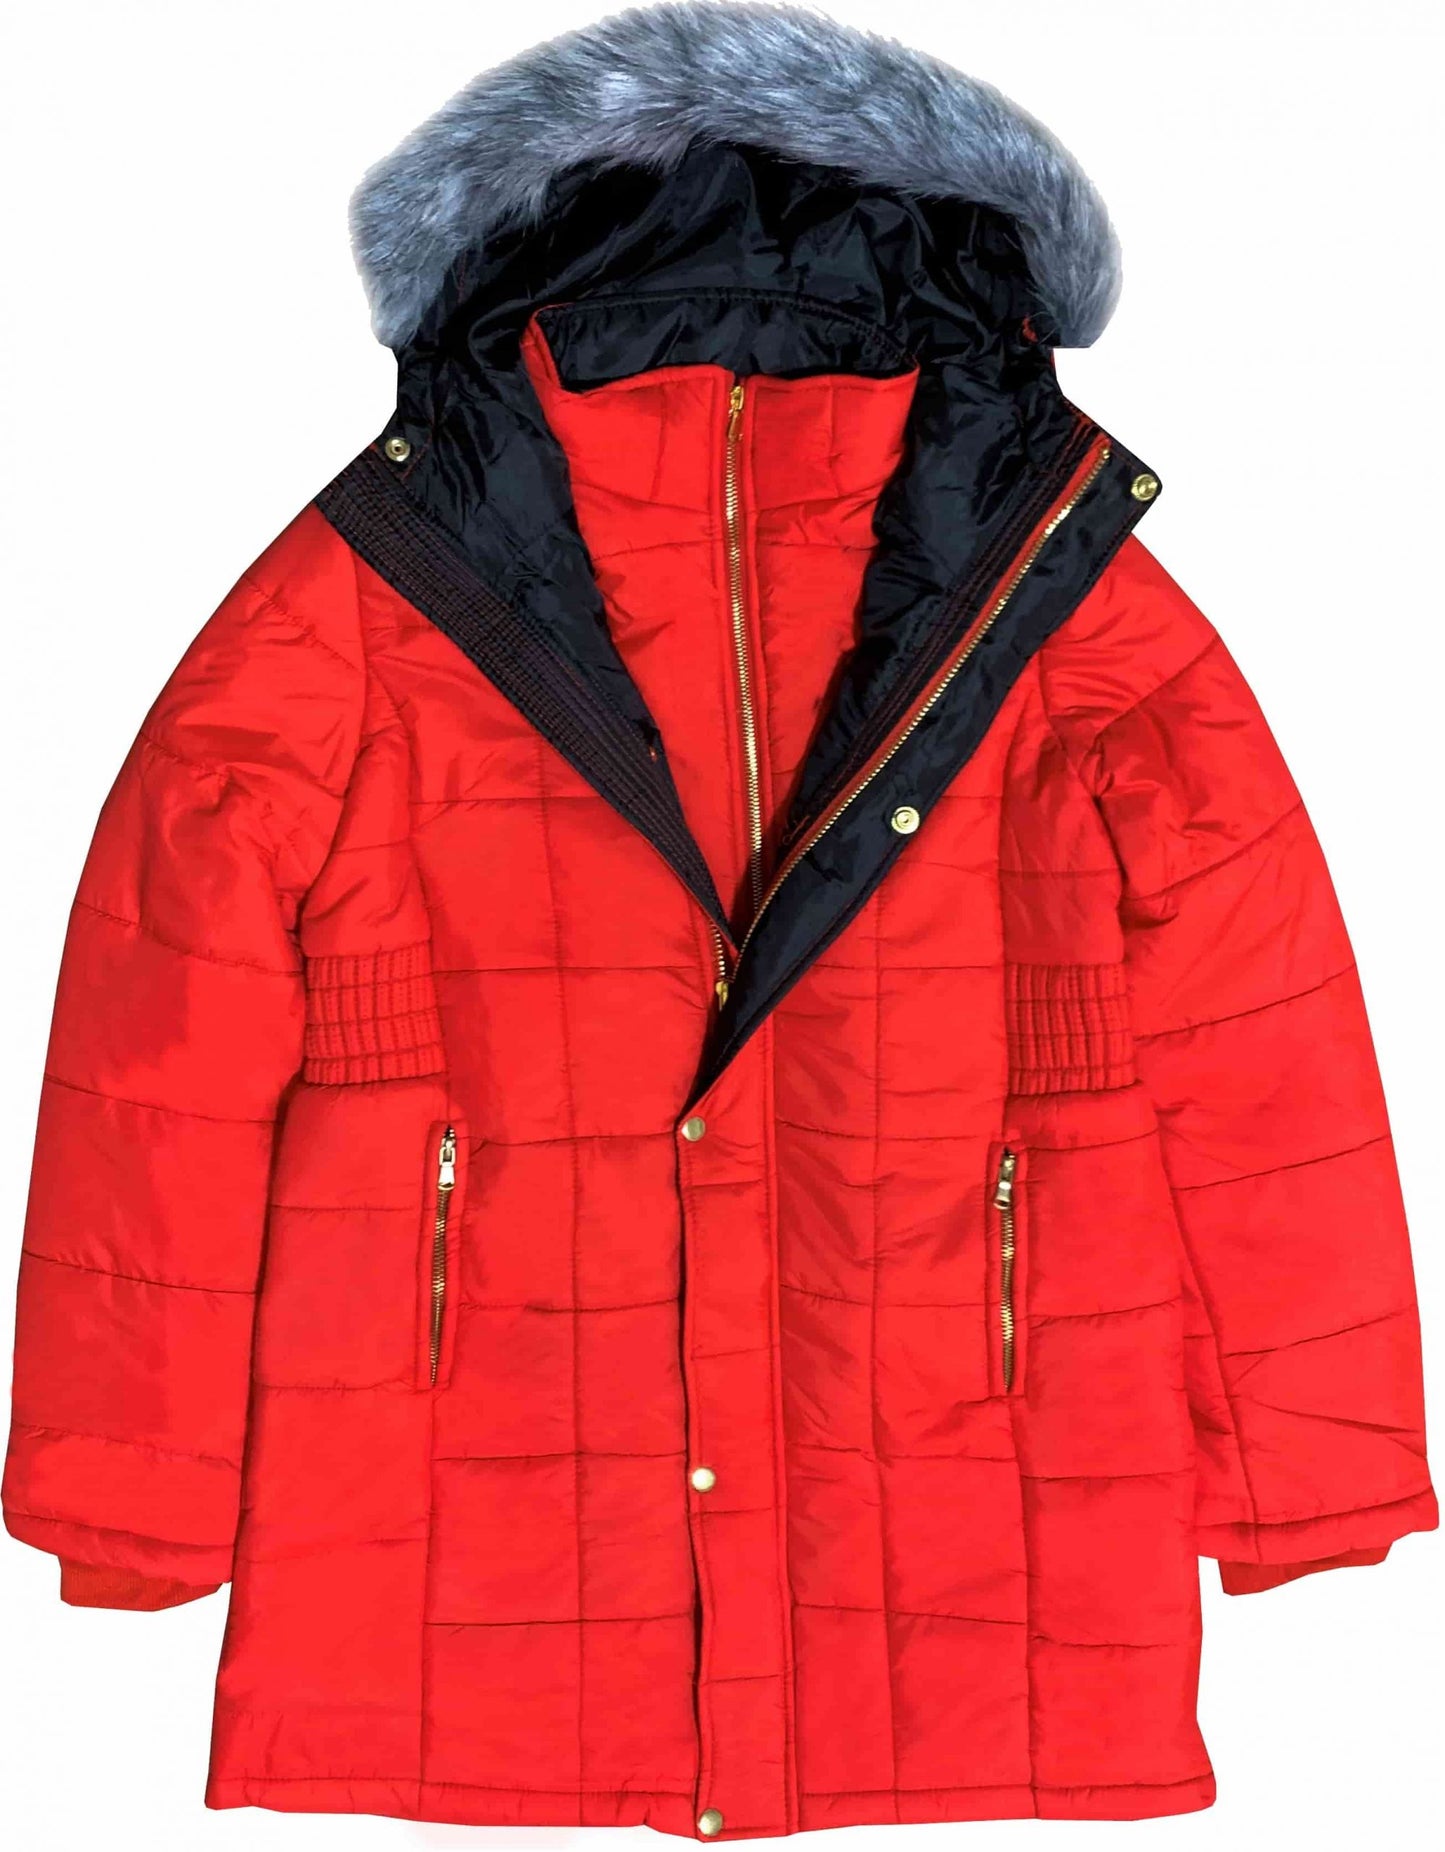 Women’s Warm Winter Coat Puffer Jacket with Removable Fur